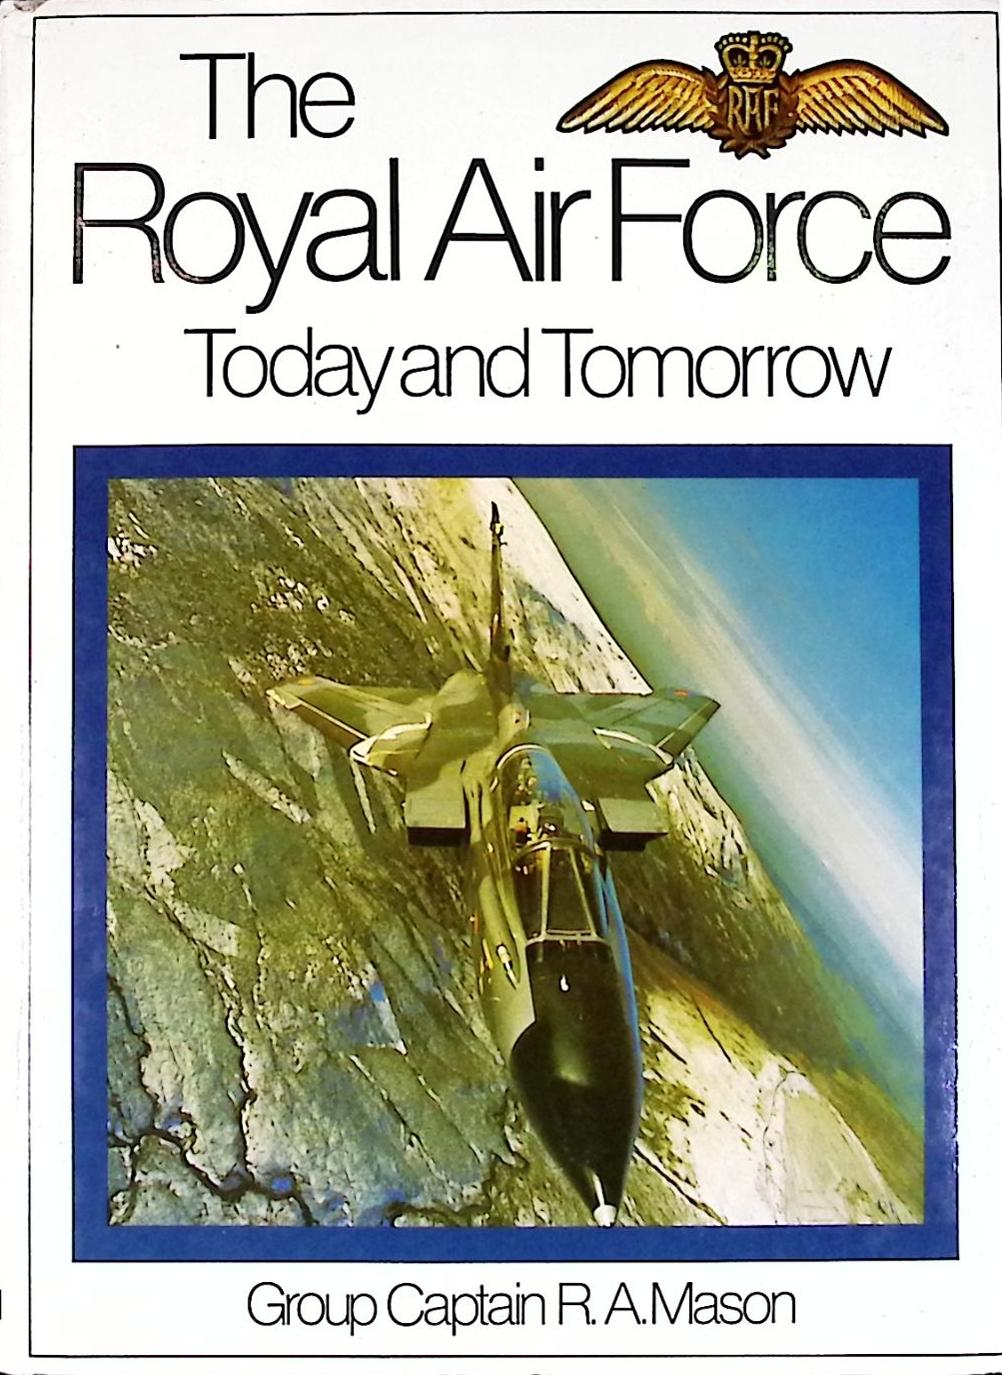 The Royal Air Force. Today and Tomorrow.